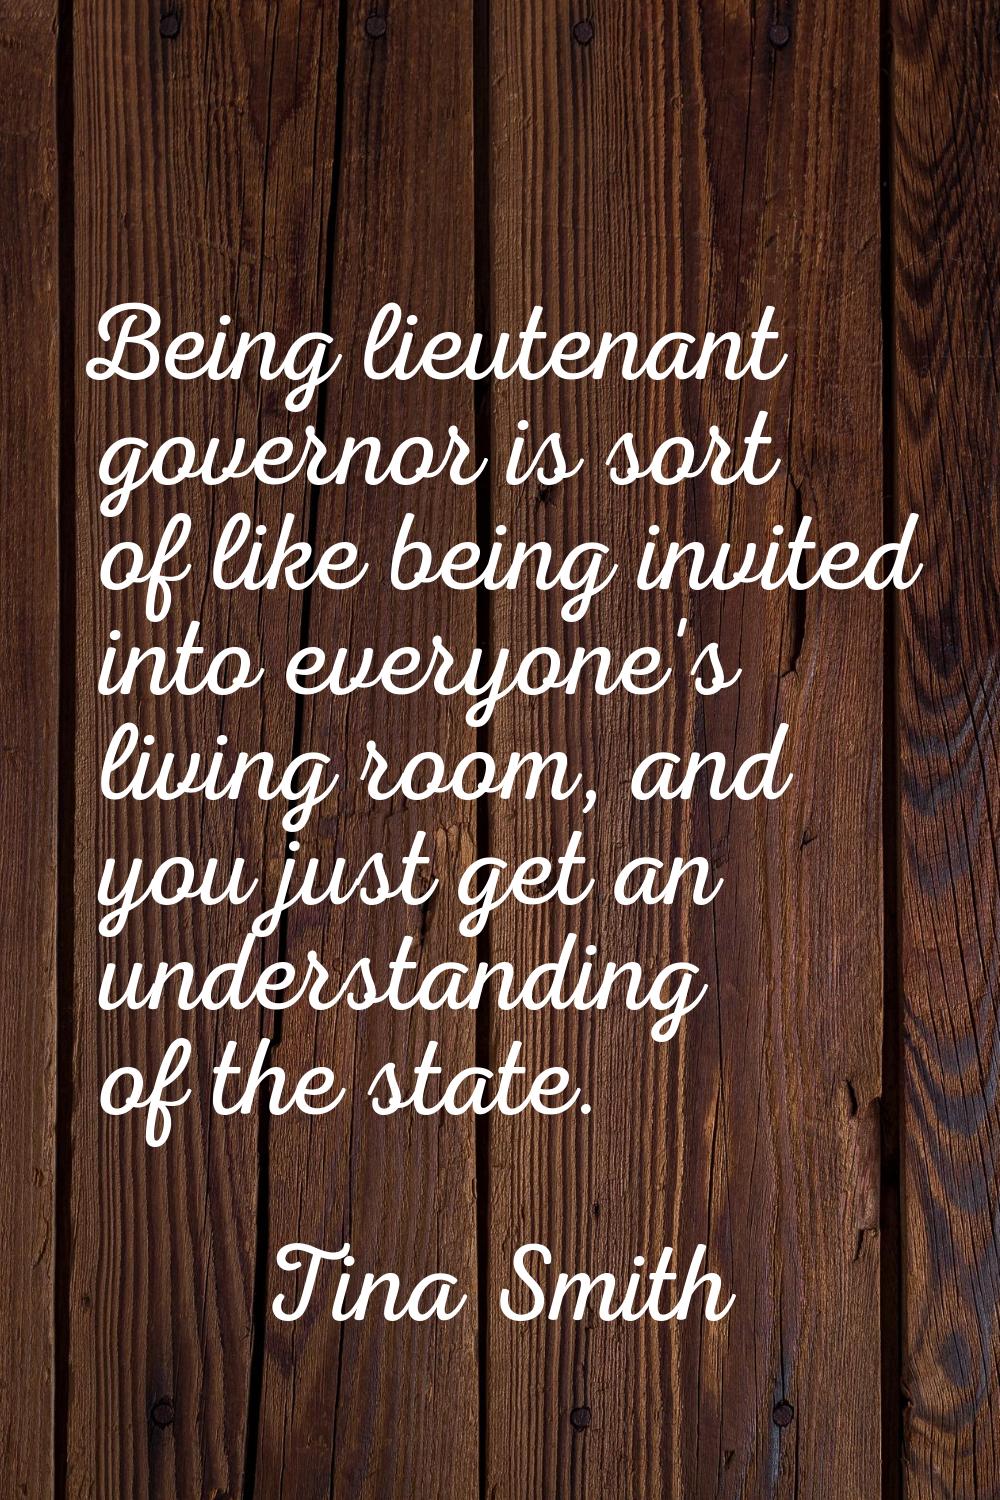 Being lieutenant governor is sort of like being invited into everyone's living room, and you just g